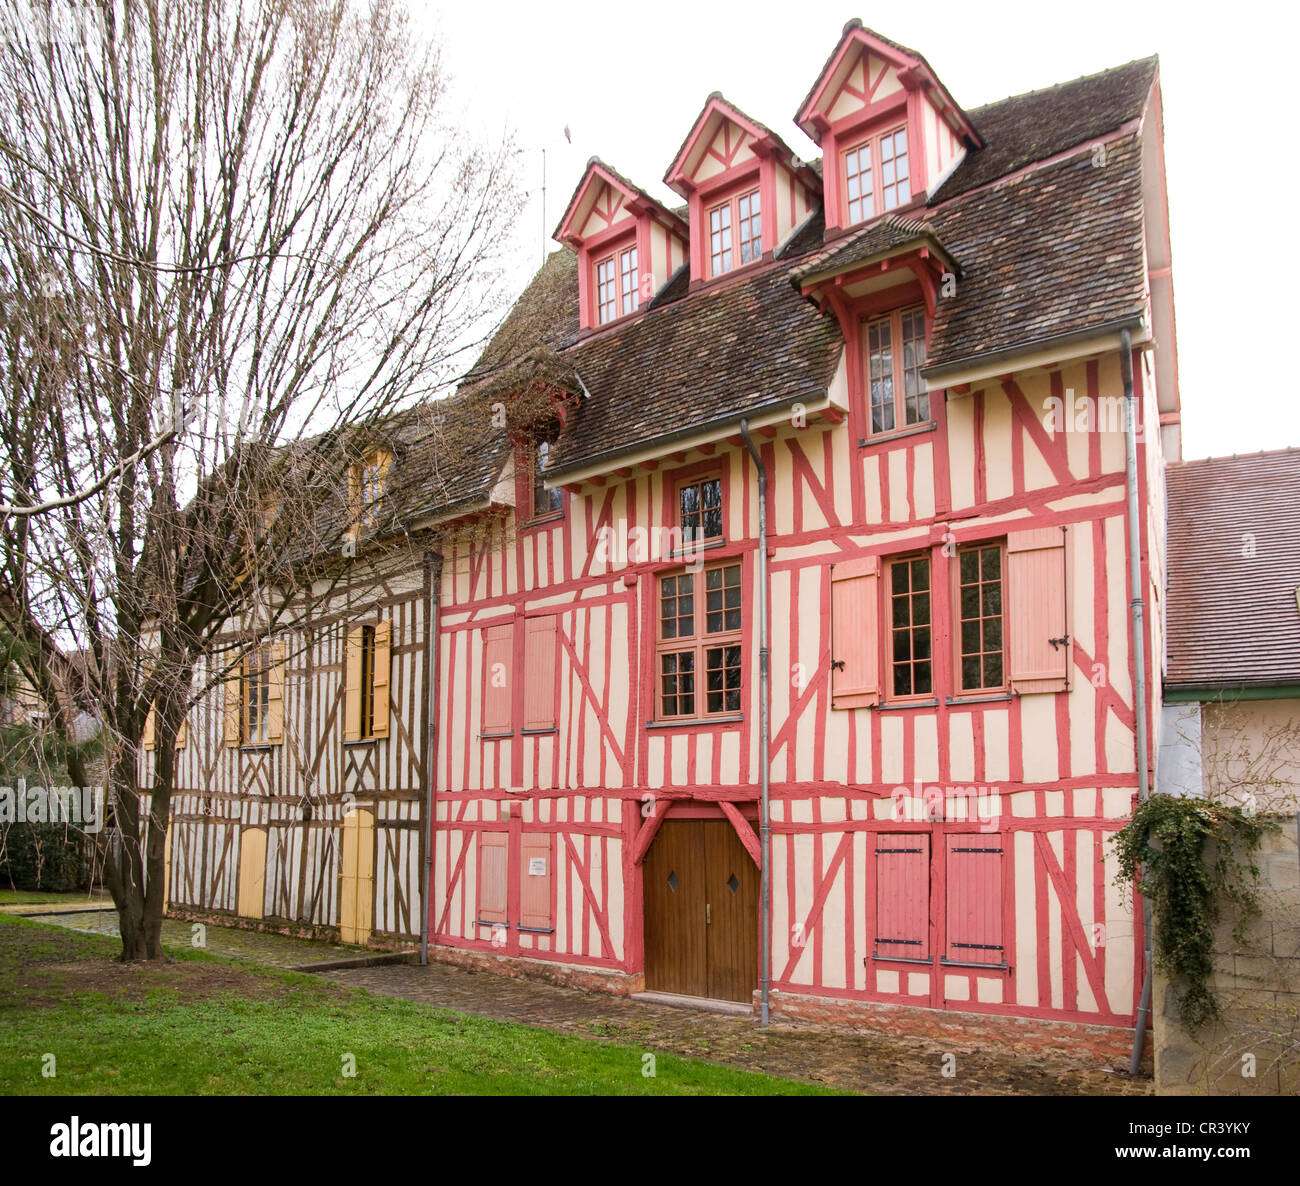 Ancient medieval half timbered wooden framed houses near the cathedral in Troyes France Stock Photo